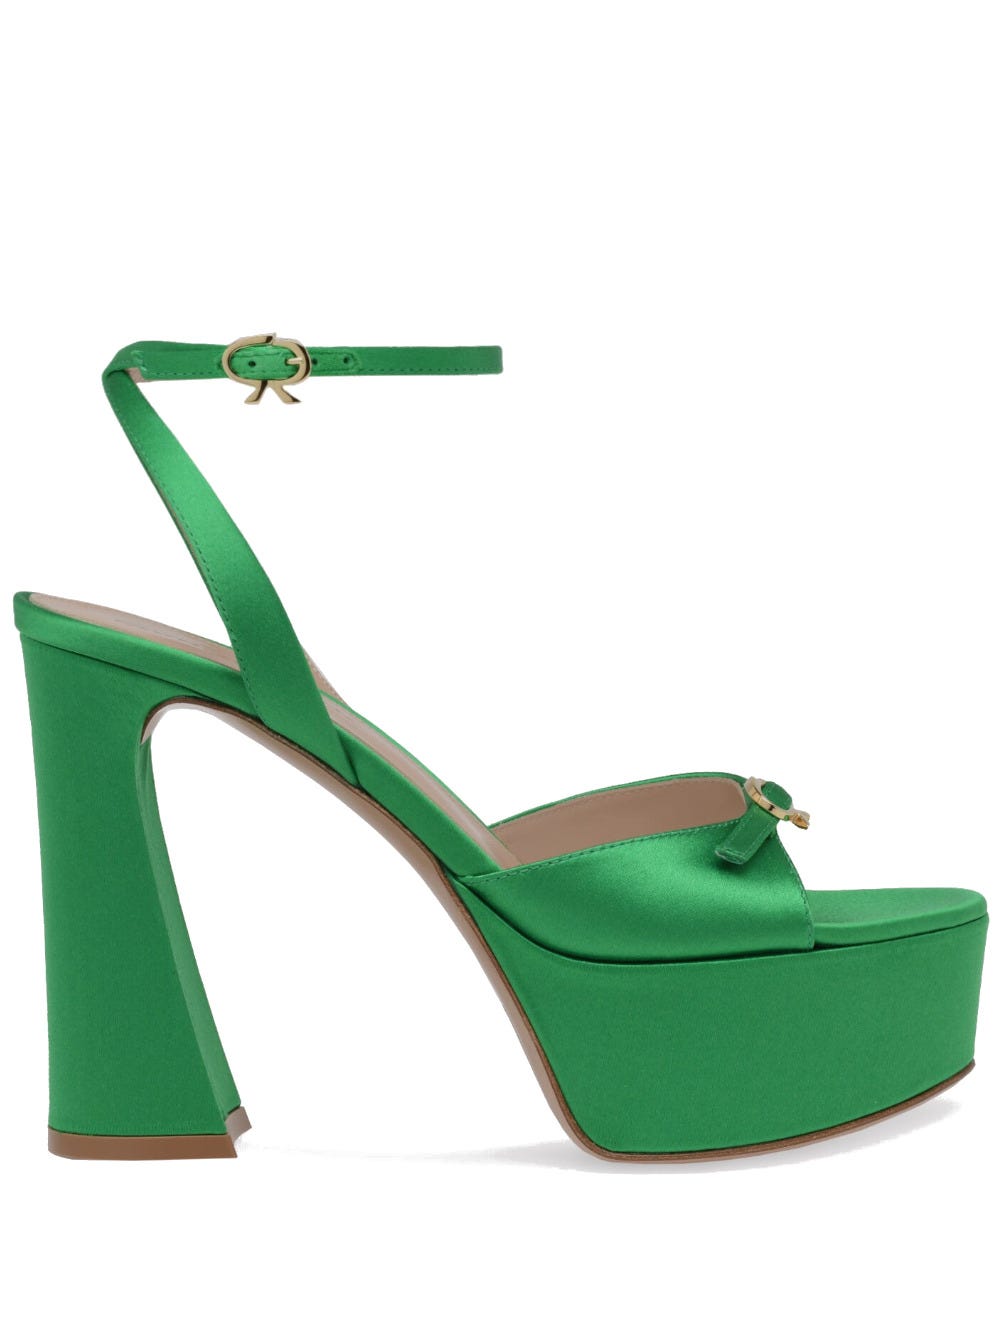 GIANVITO ROSSI MADDY GREEN SANDALS WITH PLATFORM